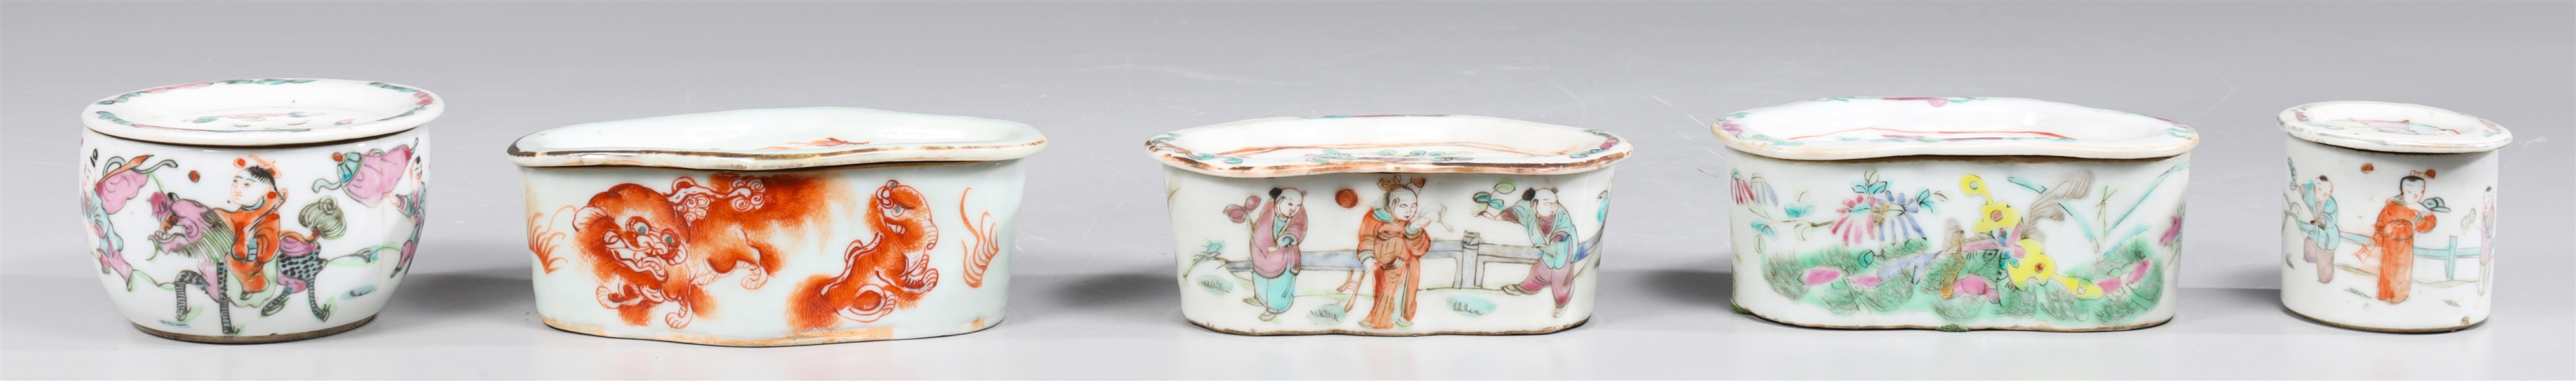 Group of five antique Chinese porcelain